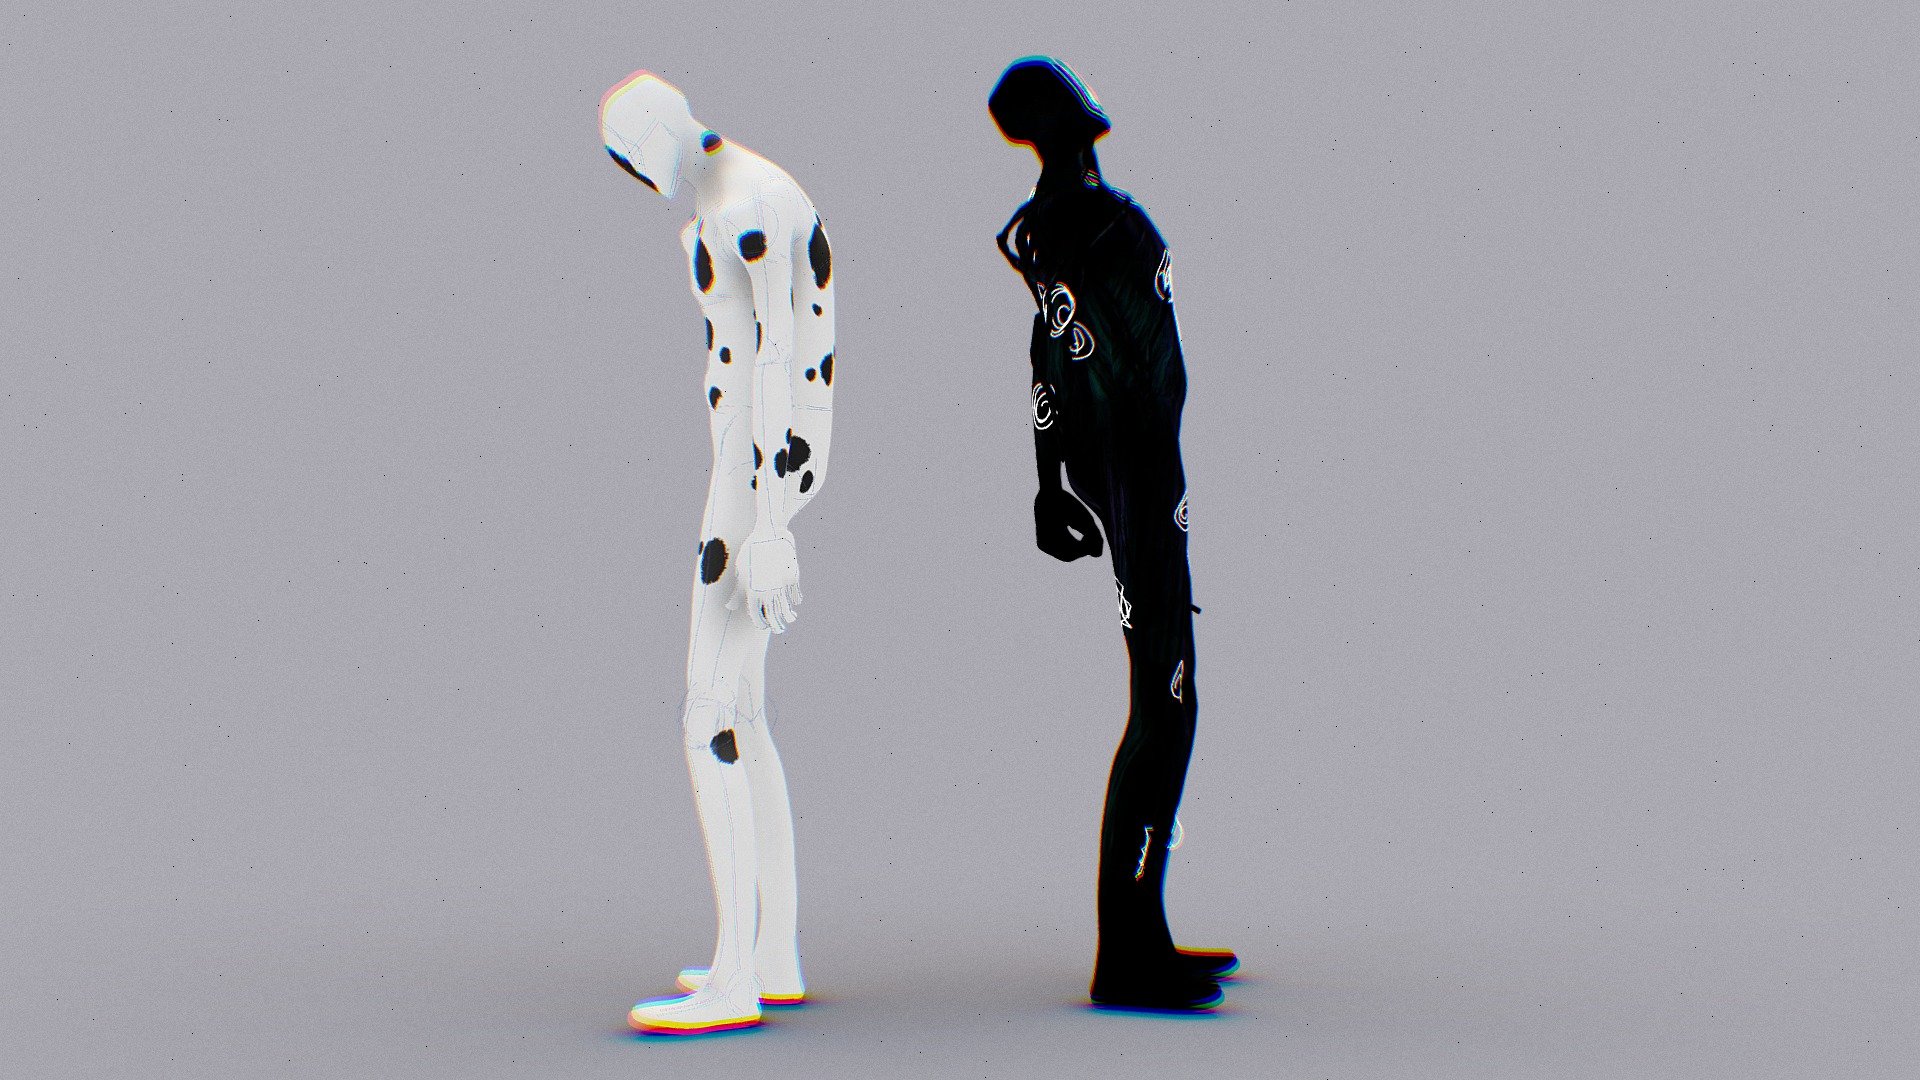 The Spot is based on Across the Spiderverse Movie. Here's an Animation I made with the models : https://www.youtube.com/watch?v=-1nt-kNPtVc - The Spot - 3D model by Rezauddin Nur (@reza825) 3d model